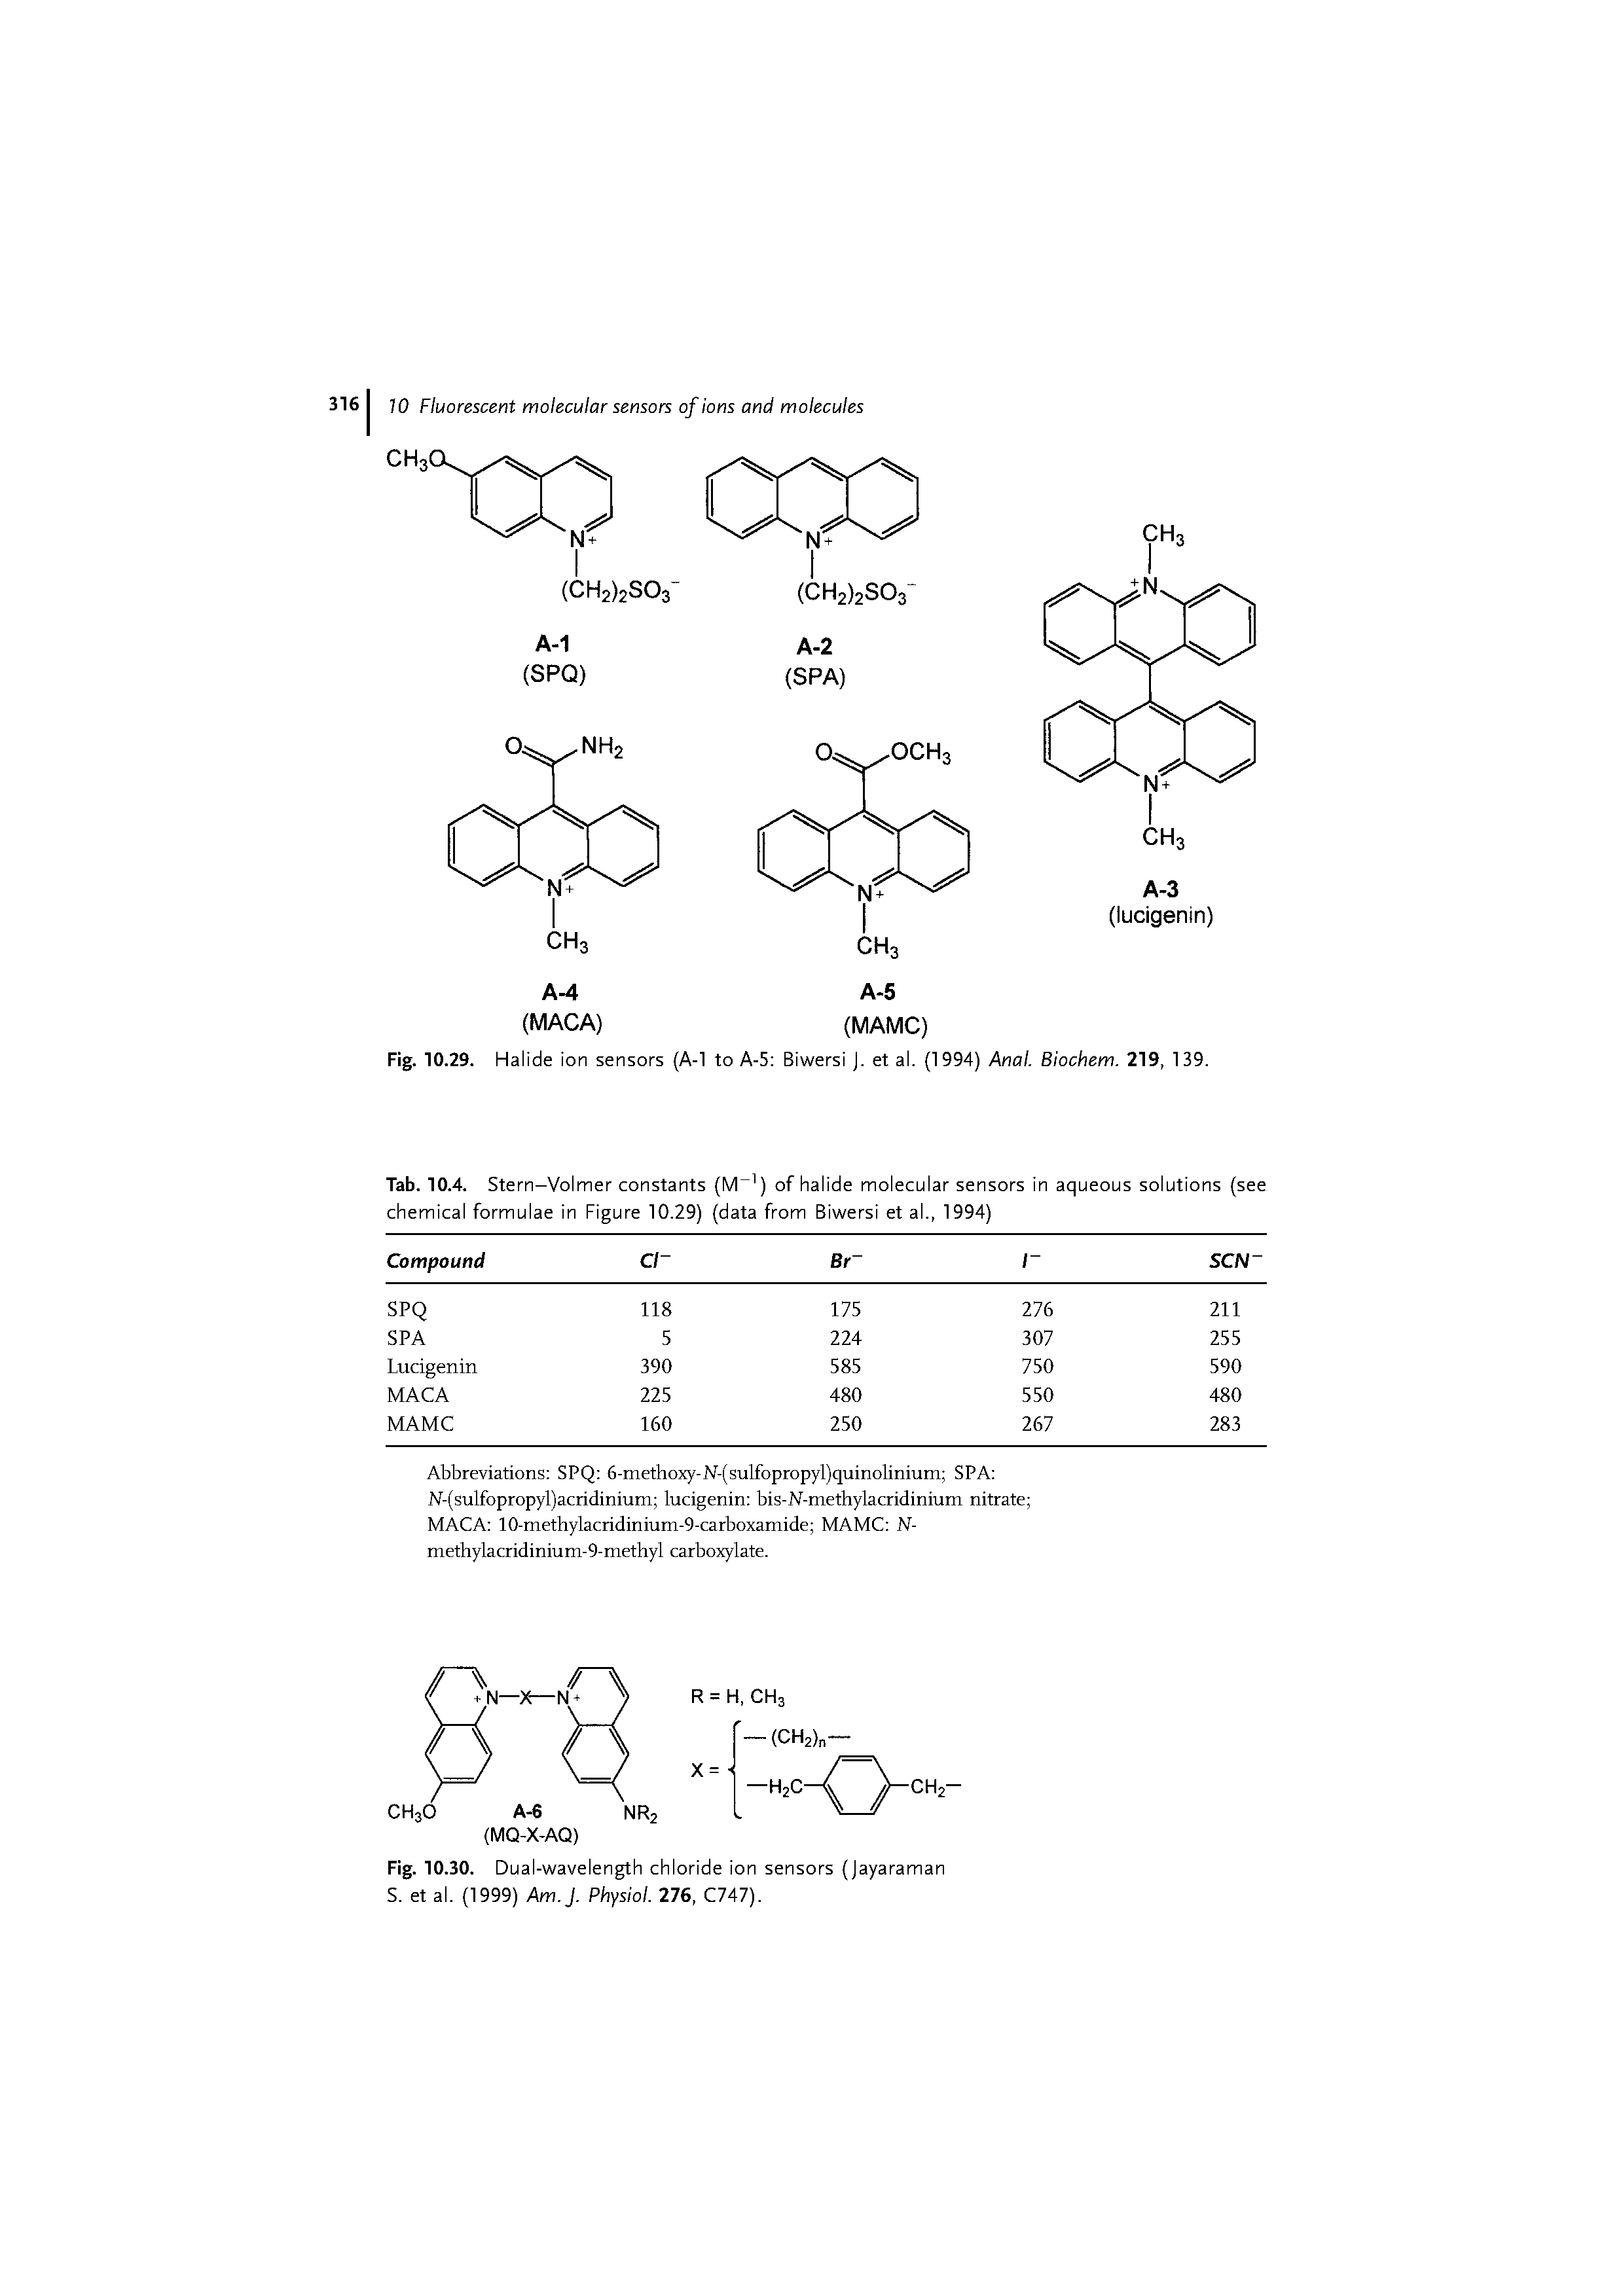 Tab. 10.4. Stern-Volmer constants (M 1) of halide molecular sensors in aqueous solutions (see chemical formulae in Figure 10.29) (data from Biwersi et al., 1994)...